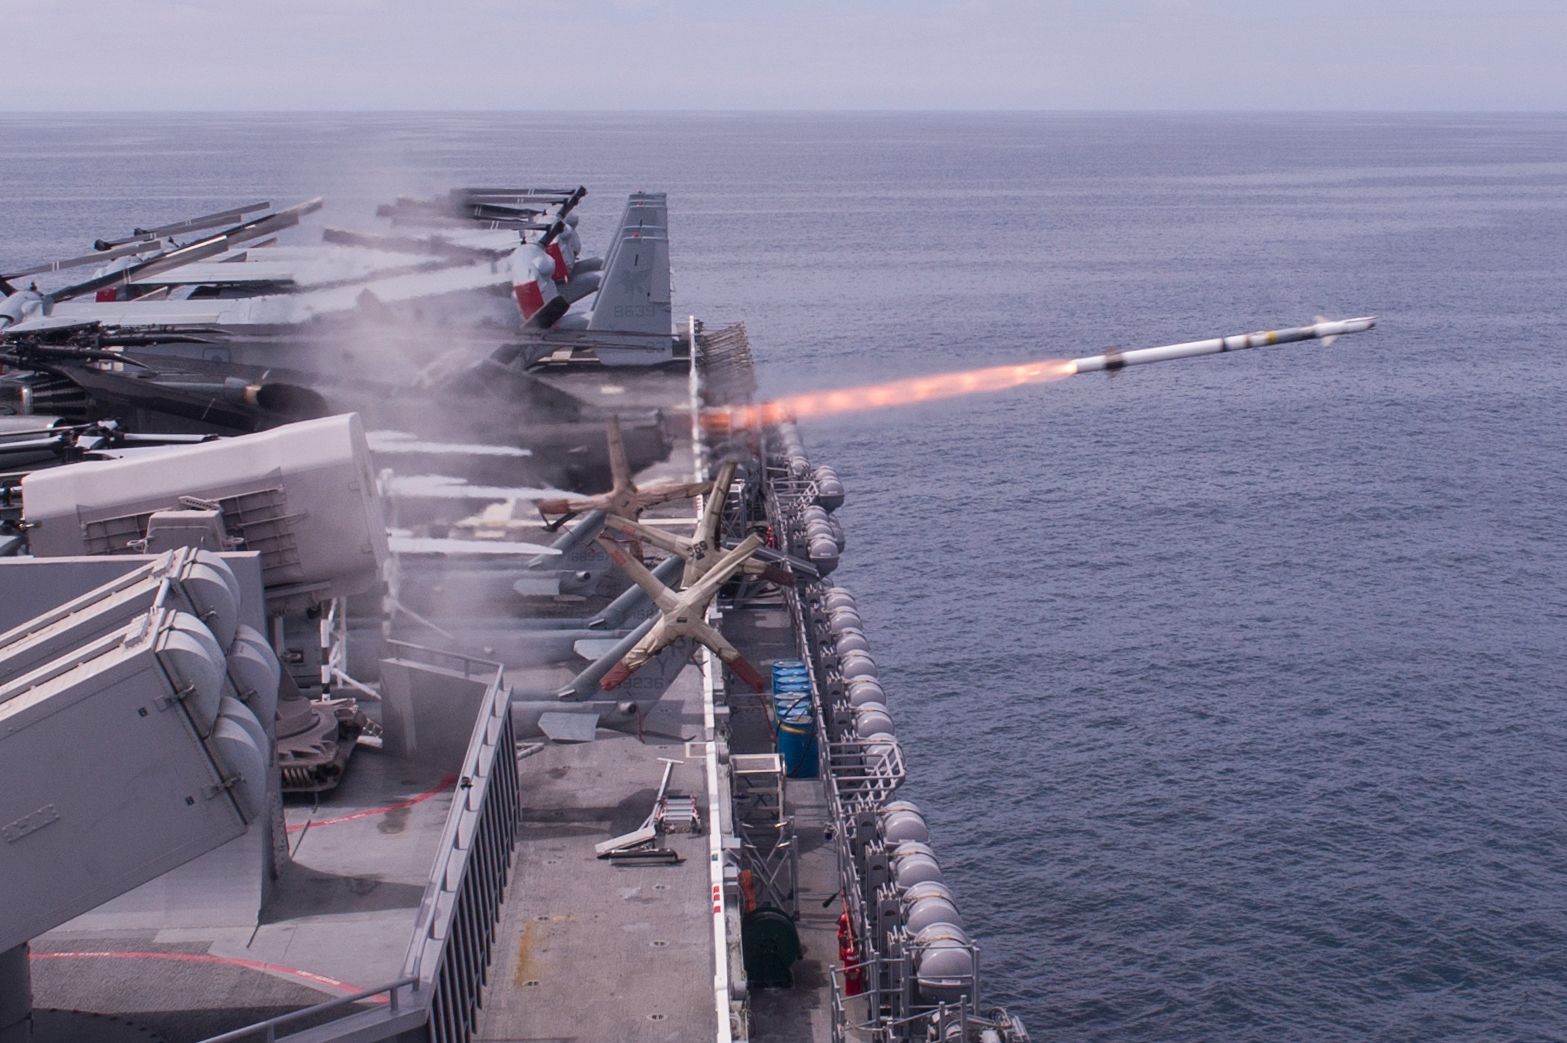 A rolling airframe missile (RAM), a surface-to-air intercept missile, launches from amphibious assault ship USS America (LHA 6), during a live-fire missile exercise off the coast of California.